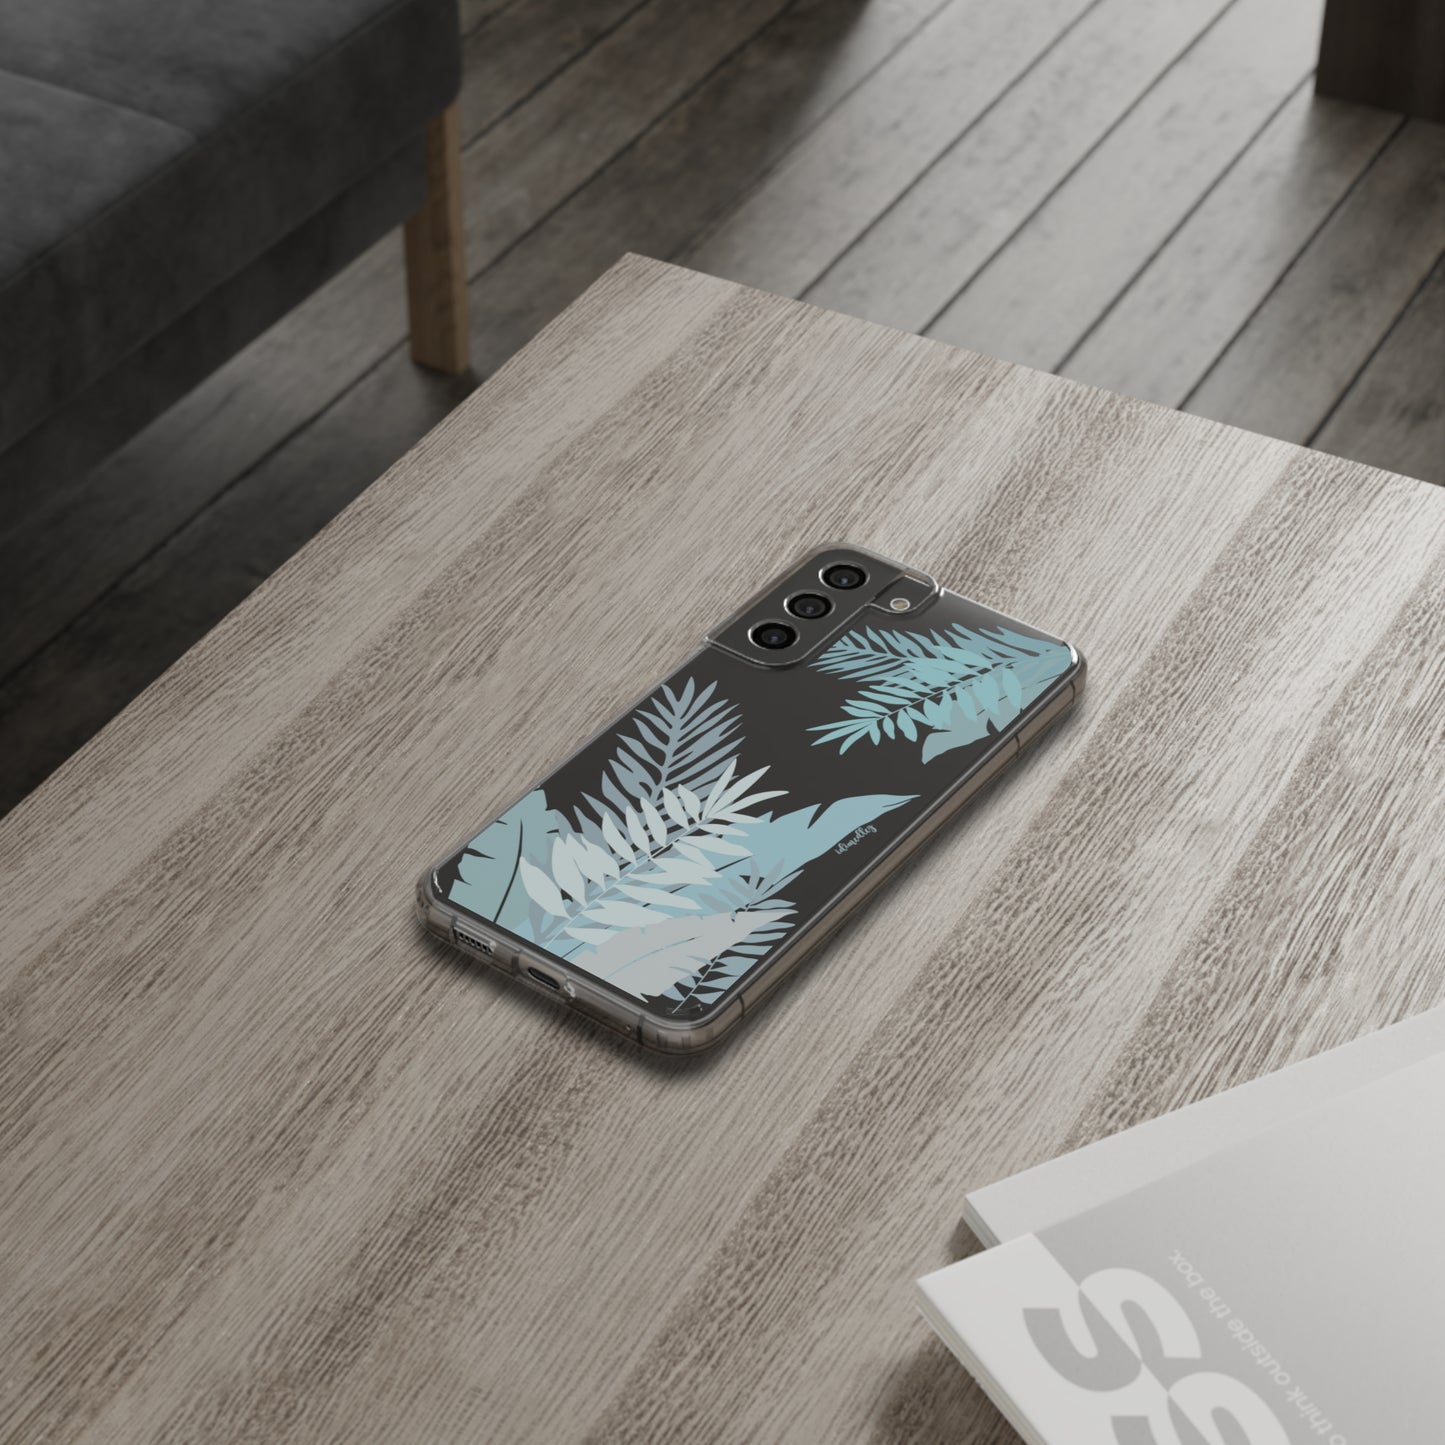 Whispering Leaves (Blue) CLEAR Case